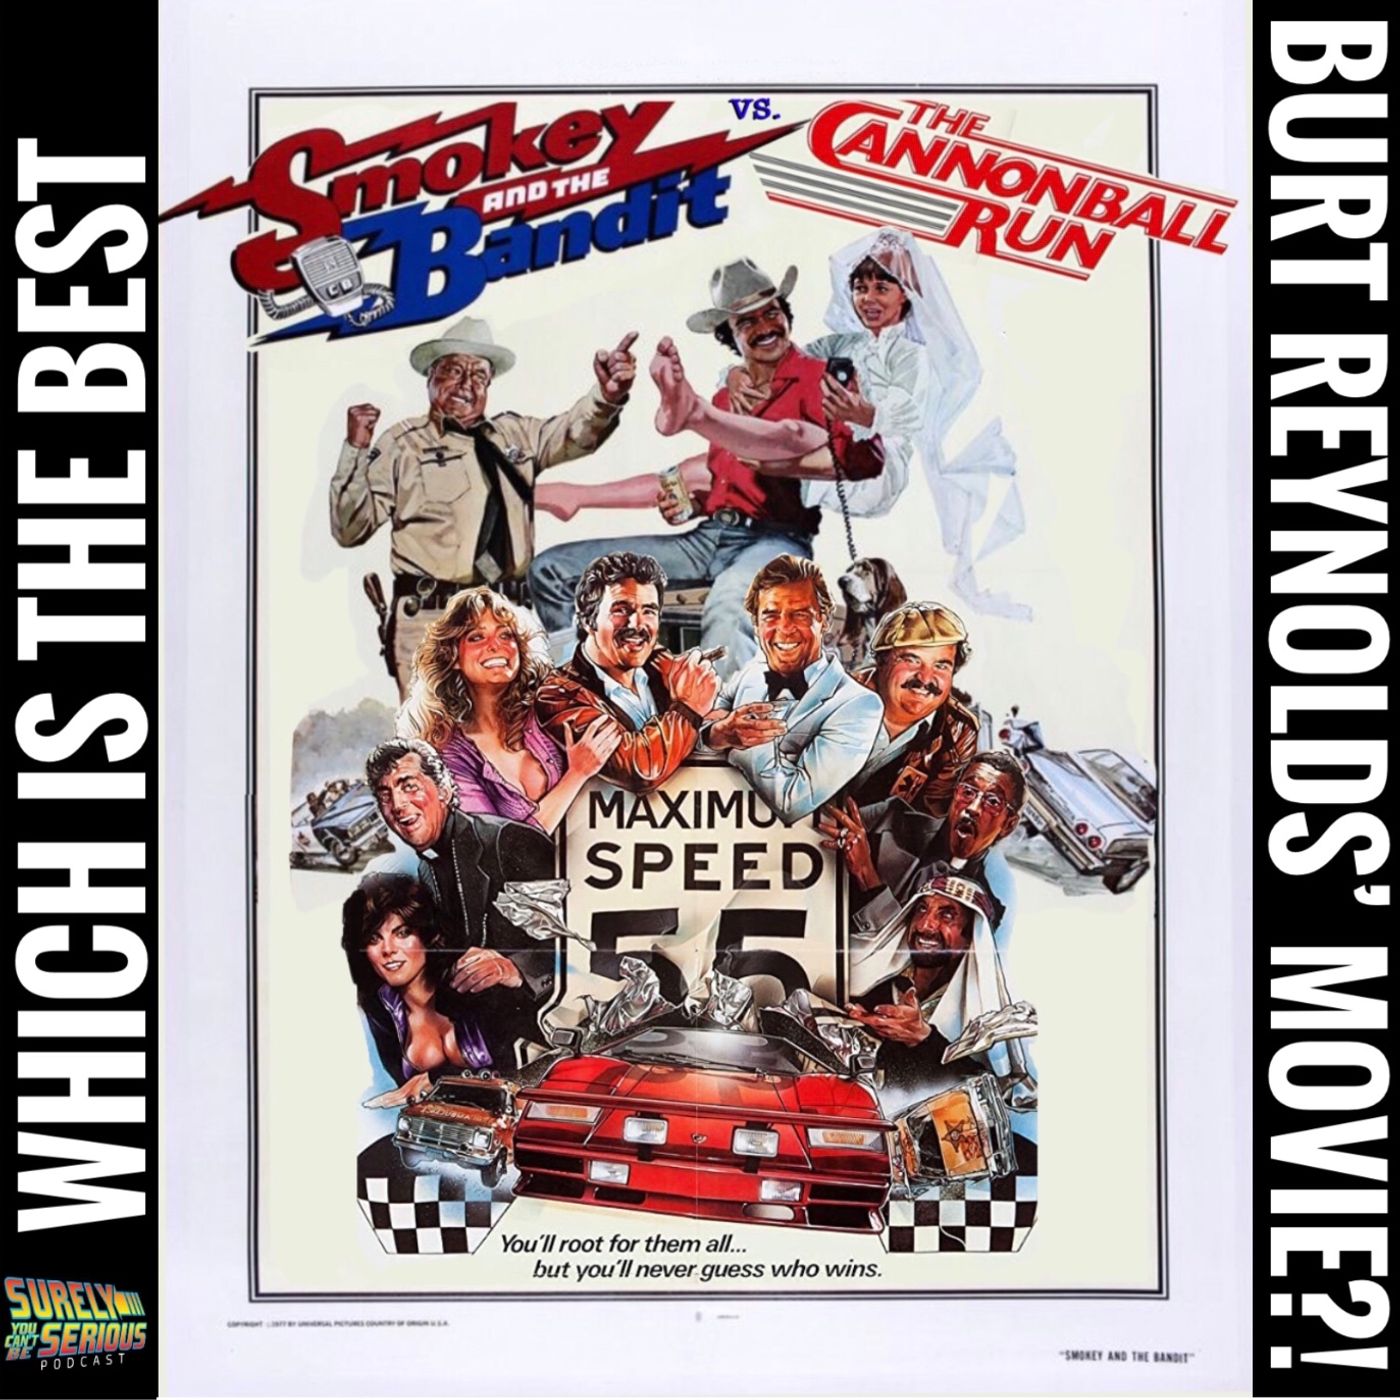 Smokey and the Bandit ('77) vs Cannonball Run ('81) - Which is Burt Reynolds' Best? Image